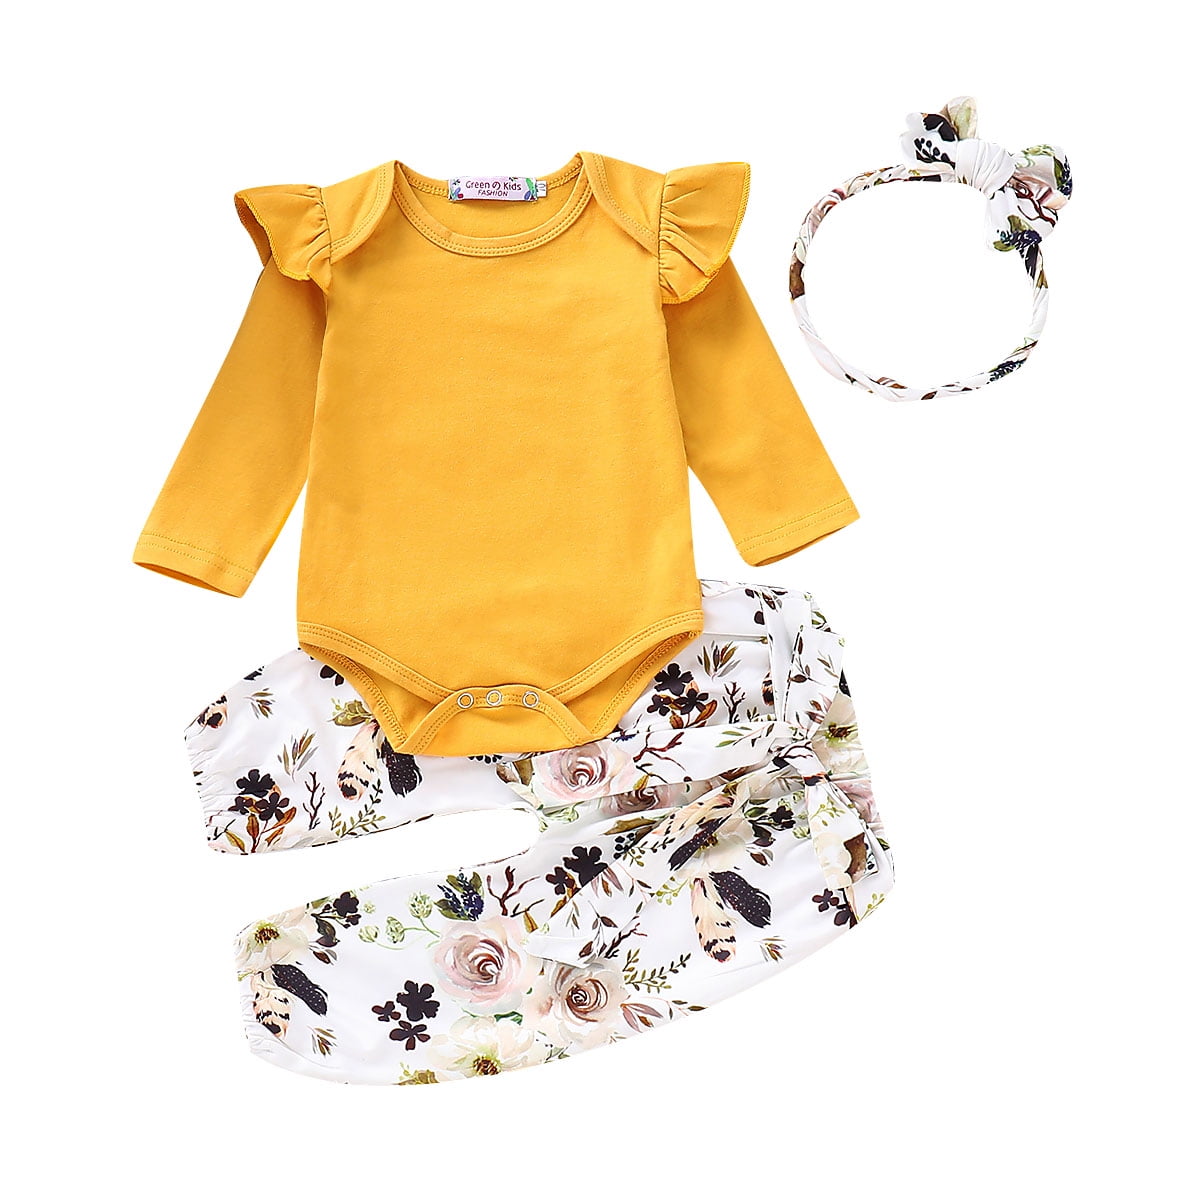 Newborn Baby Girl Clothes Infant Girls Outfits Ruffle Sleeve Romper Bodysuit Floral Pants Toddler Baby Girl Outfits 